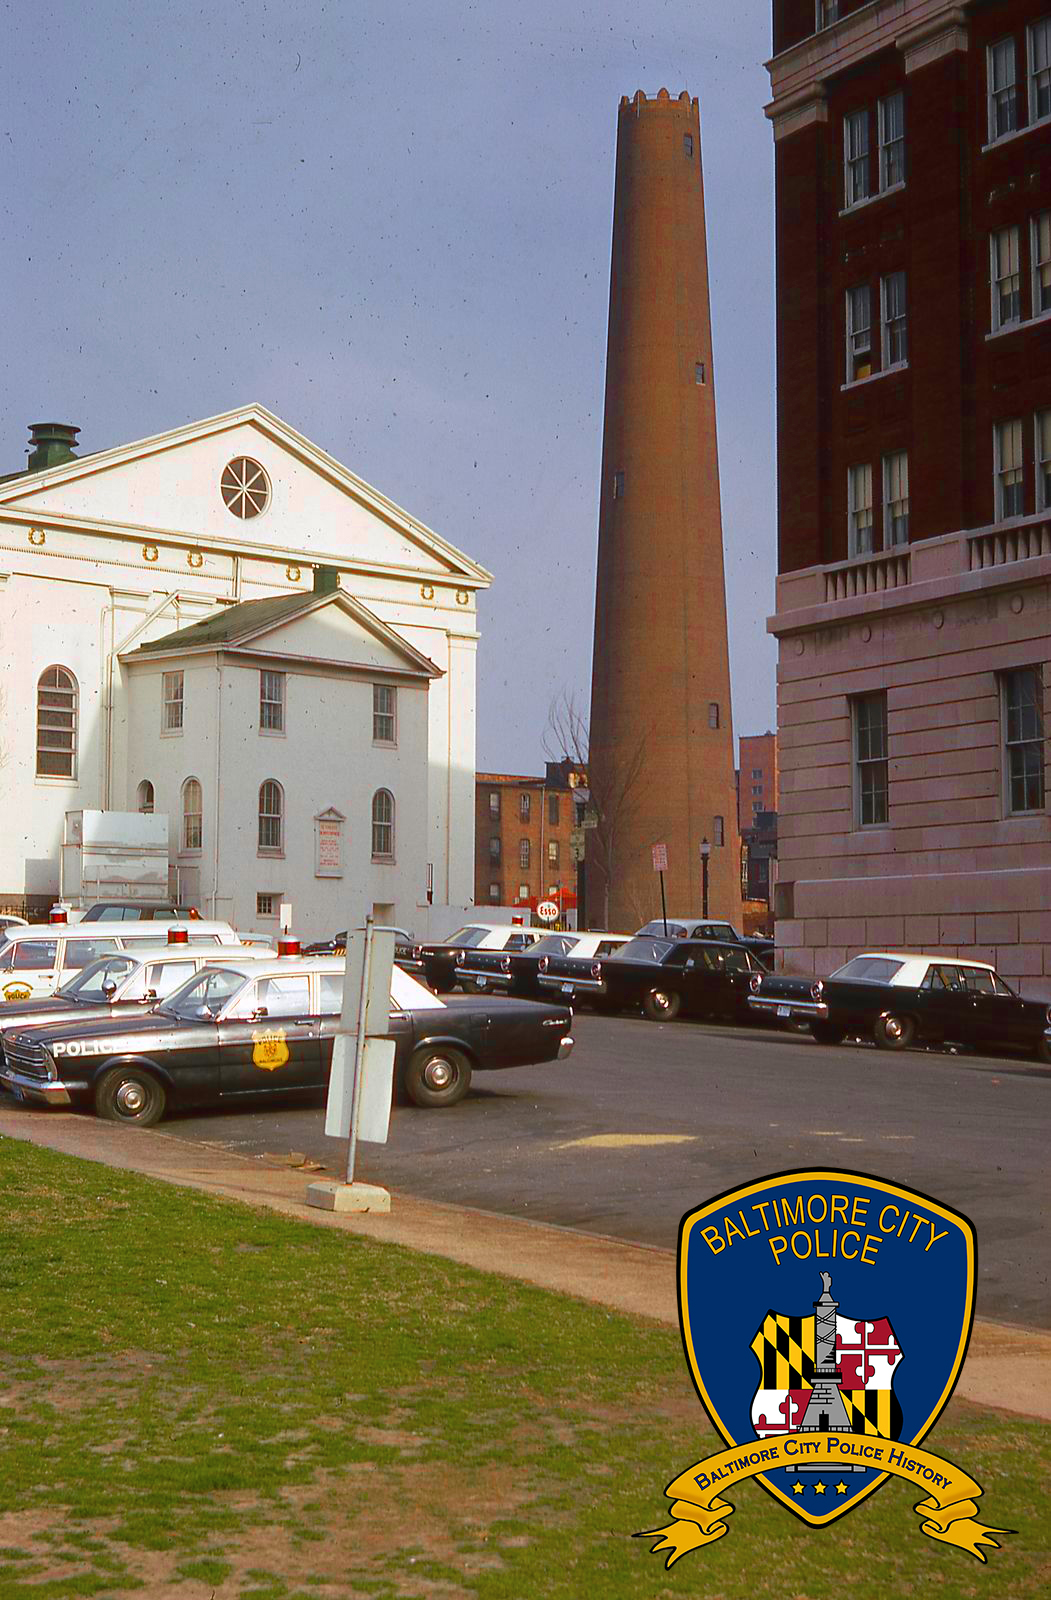 BPD old and shot tower with logo